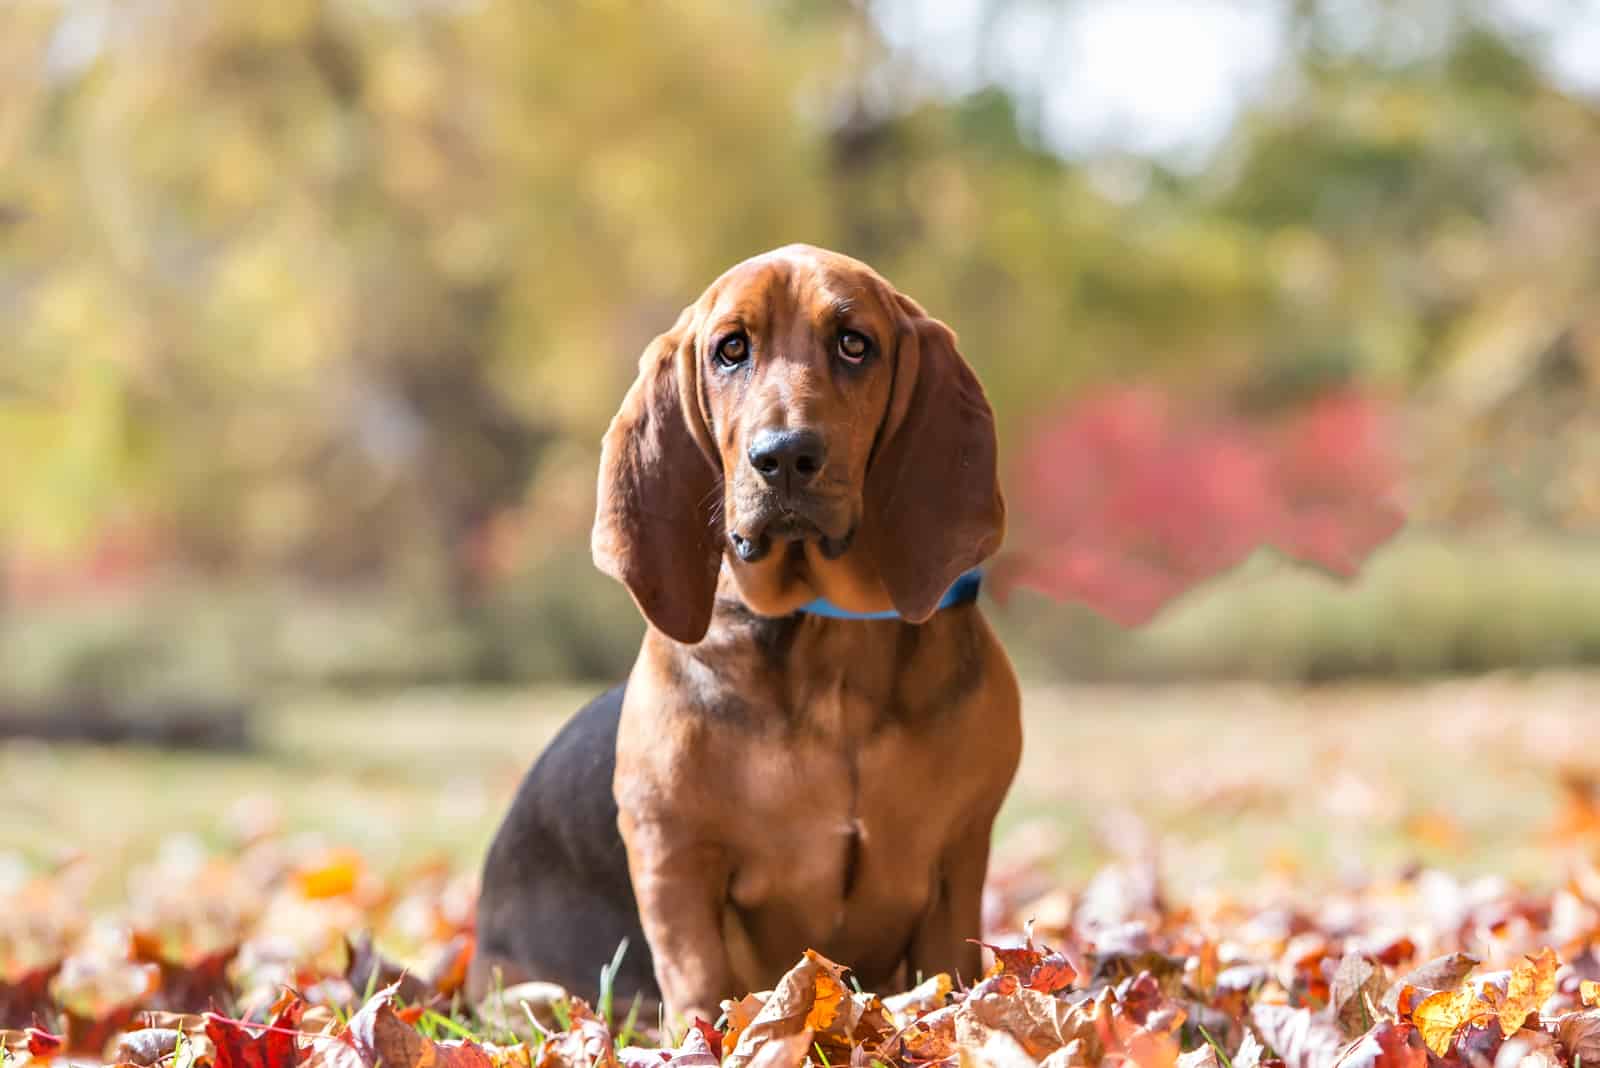 15 Best Harnesses For Basset Hounds: Reviews & Buyer’s Guide